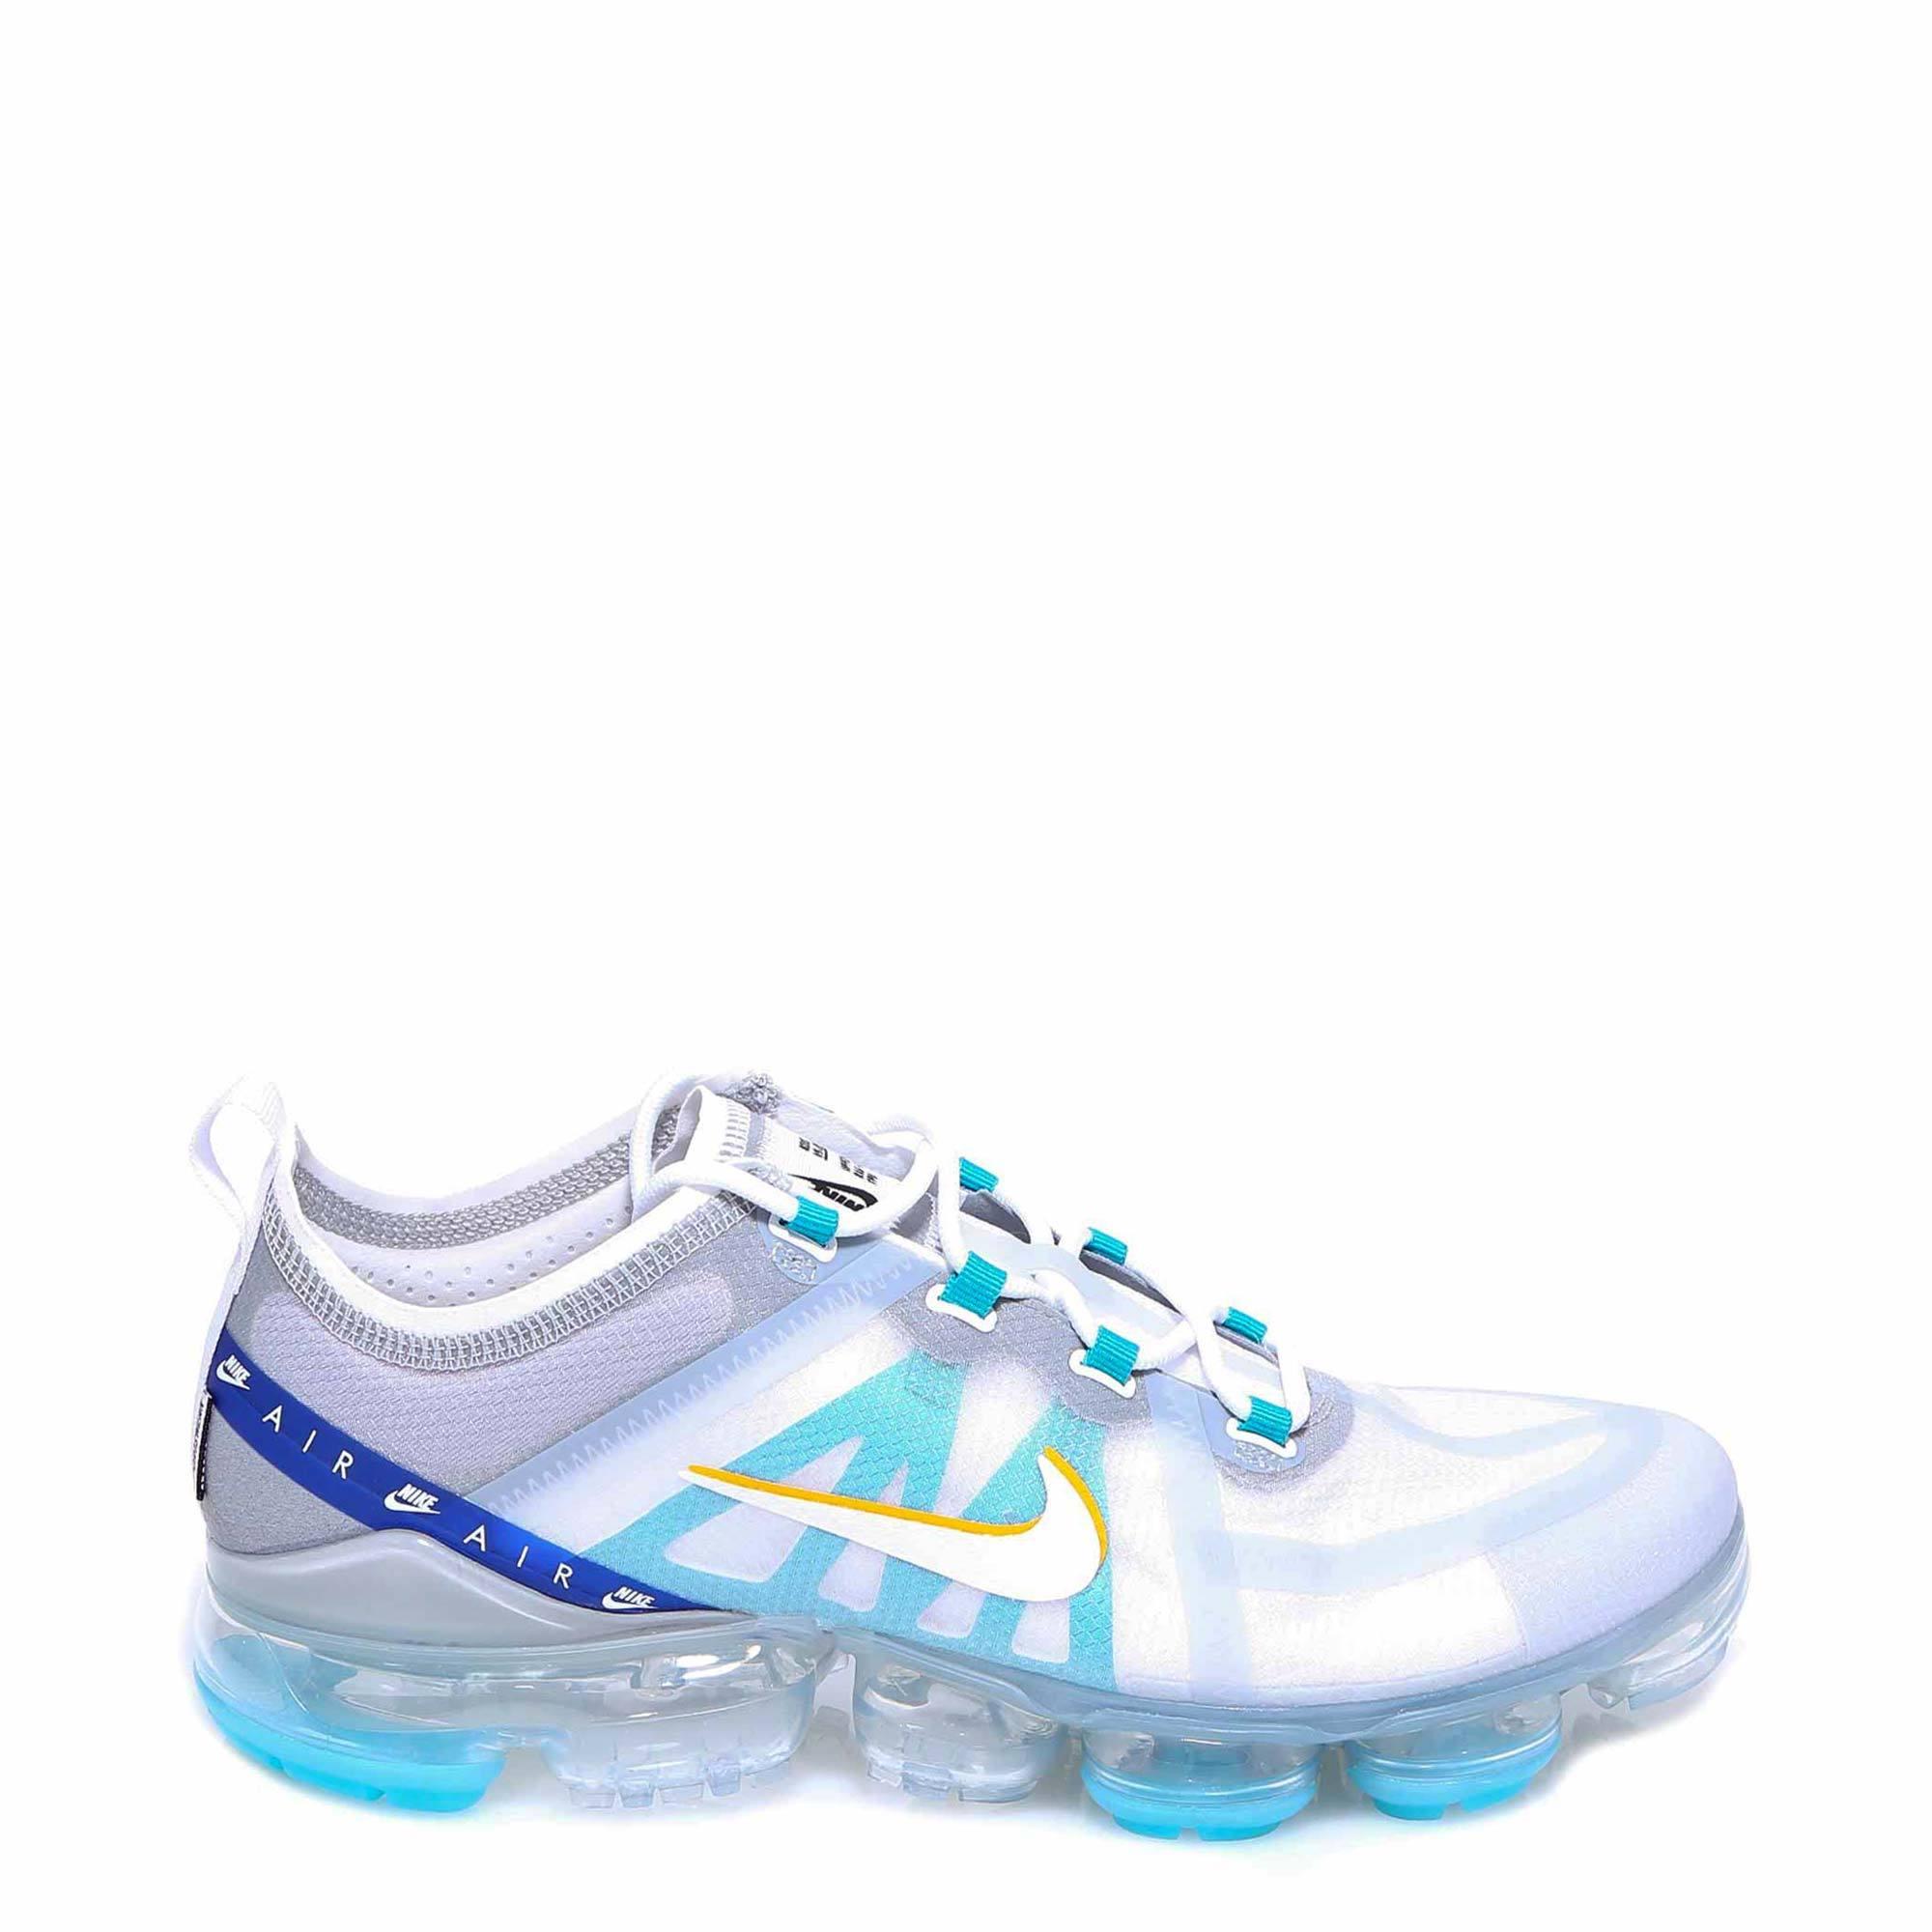 Nike Cotton Air Vapormax 2019 Lace Up Sneakers in White for Men - Lyst